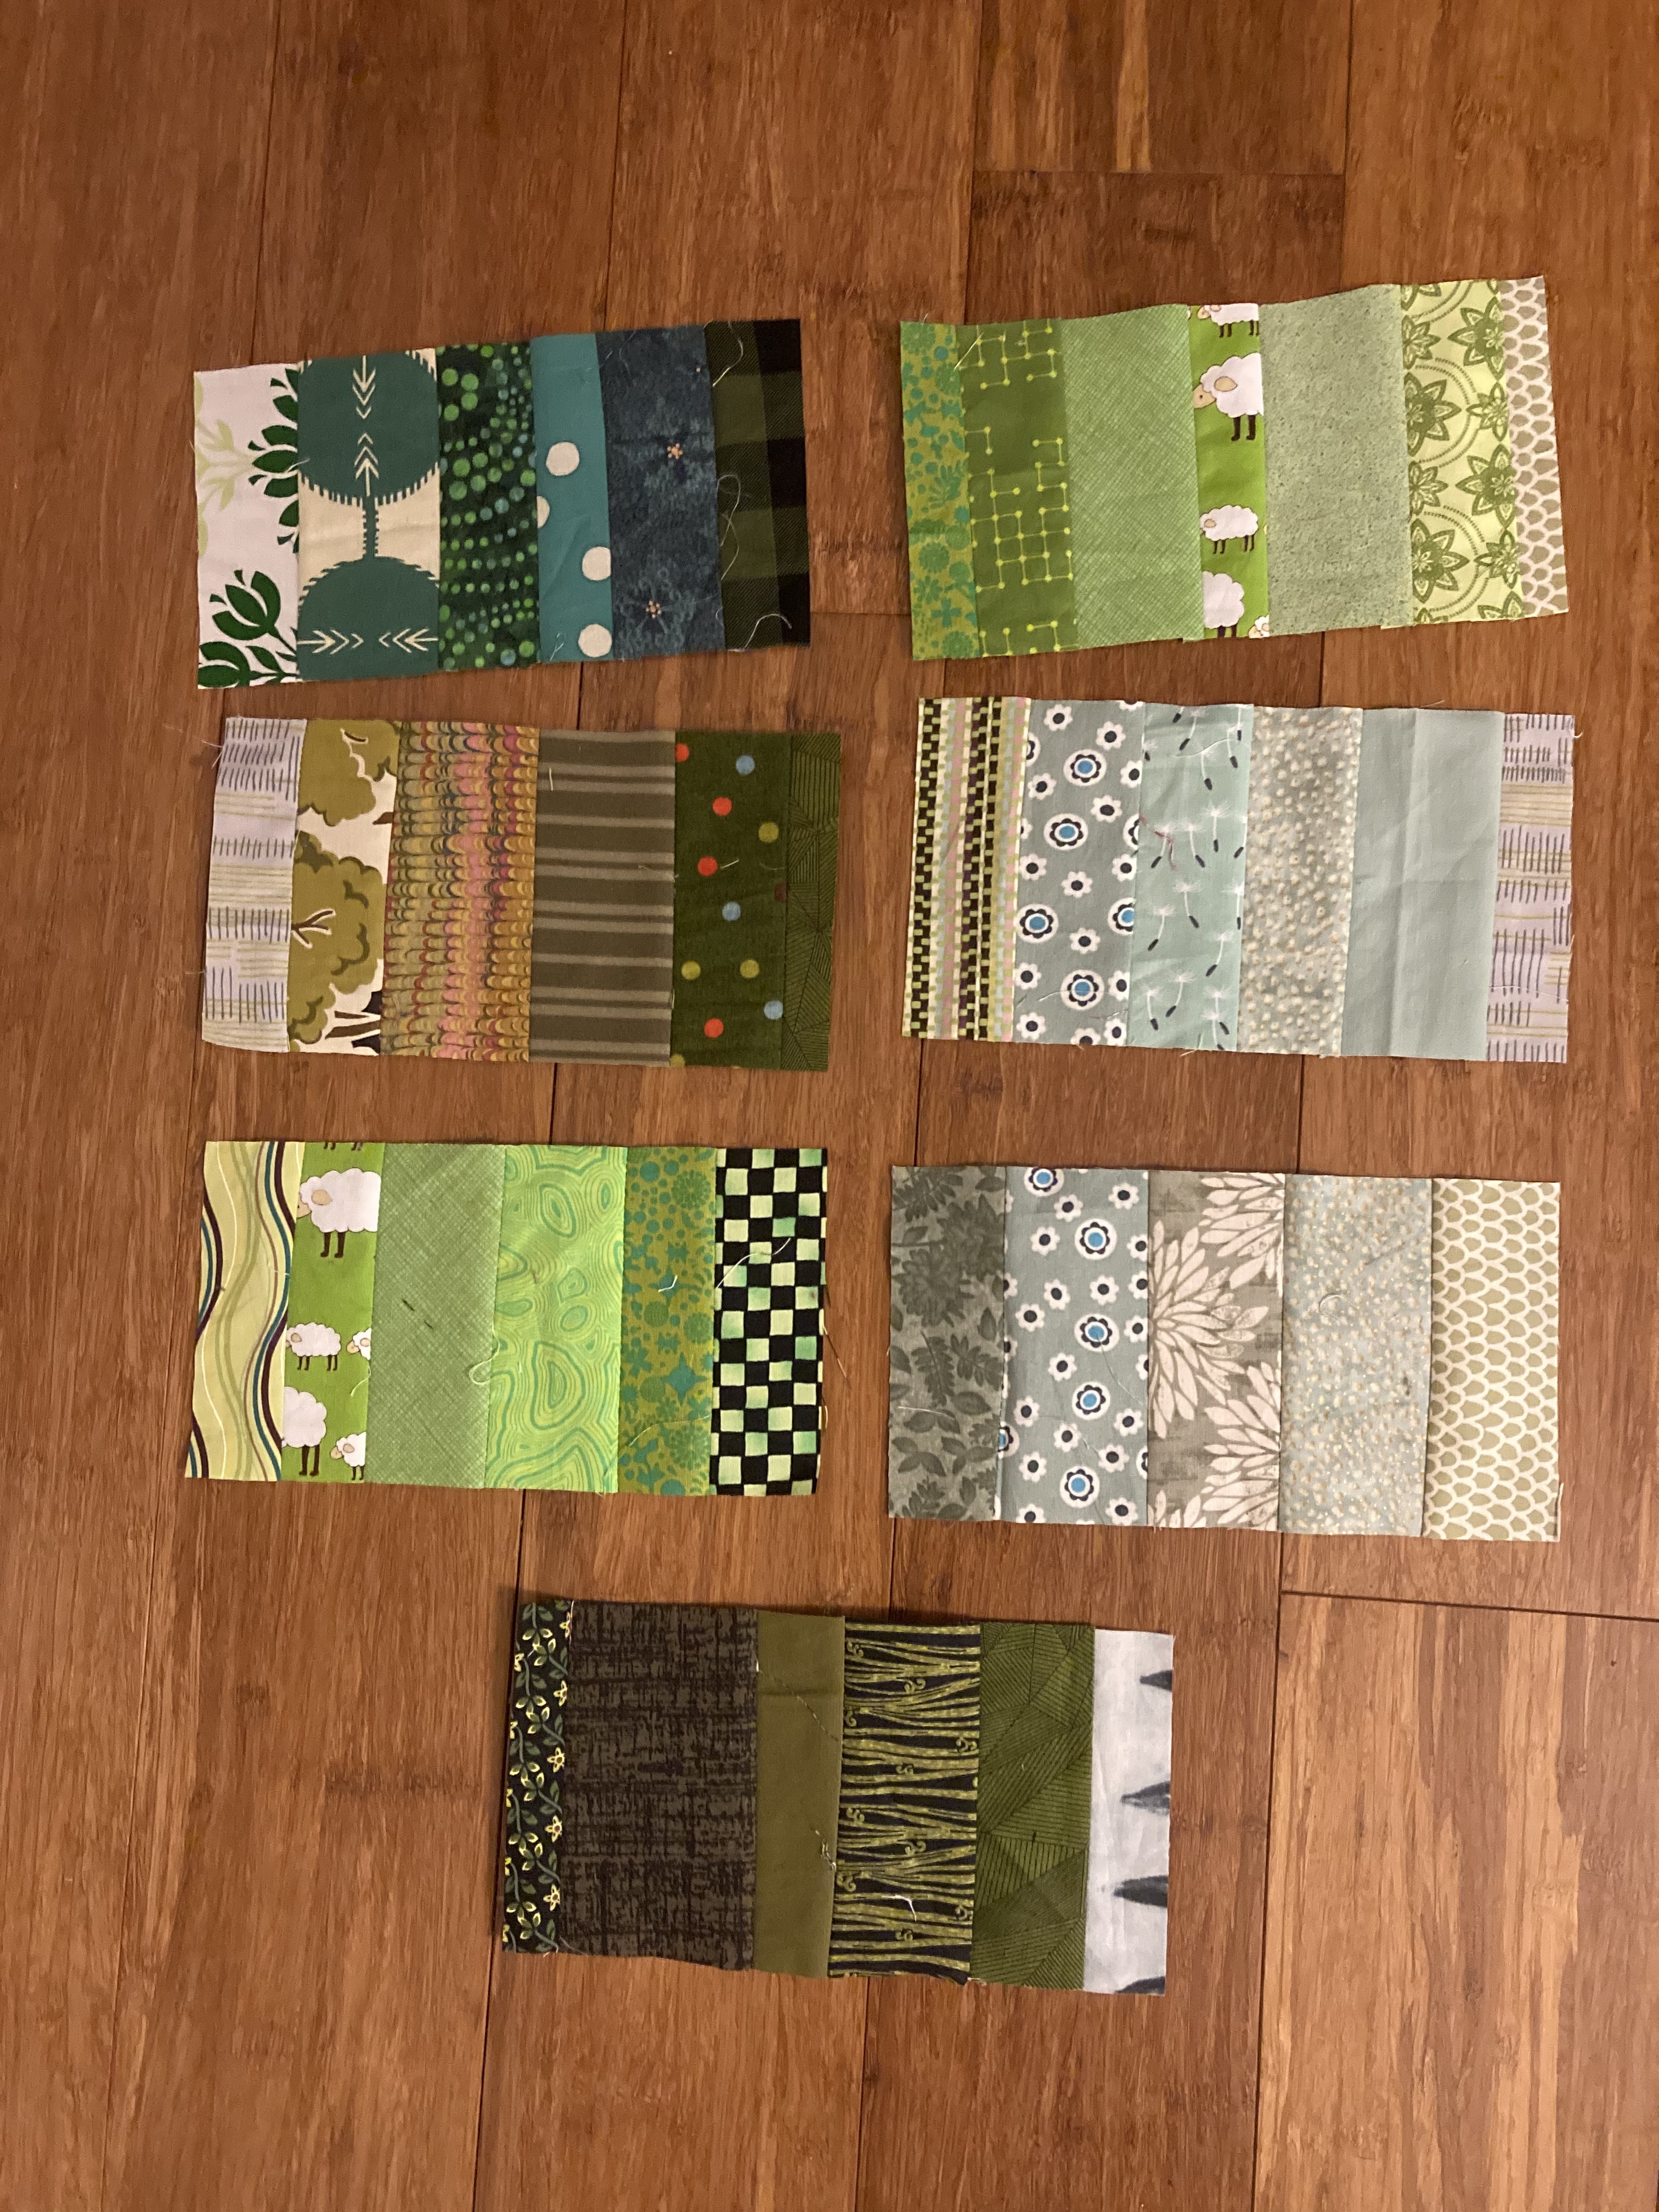 Fabric Organization Ideas - Diary of a Quilter - a quilt blog